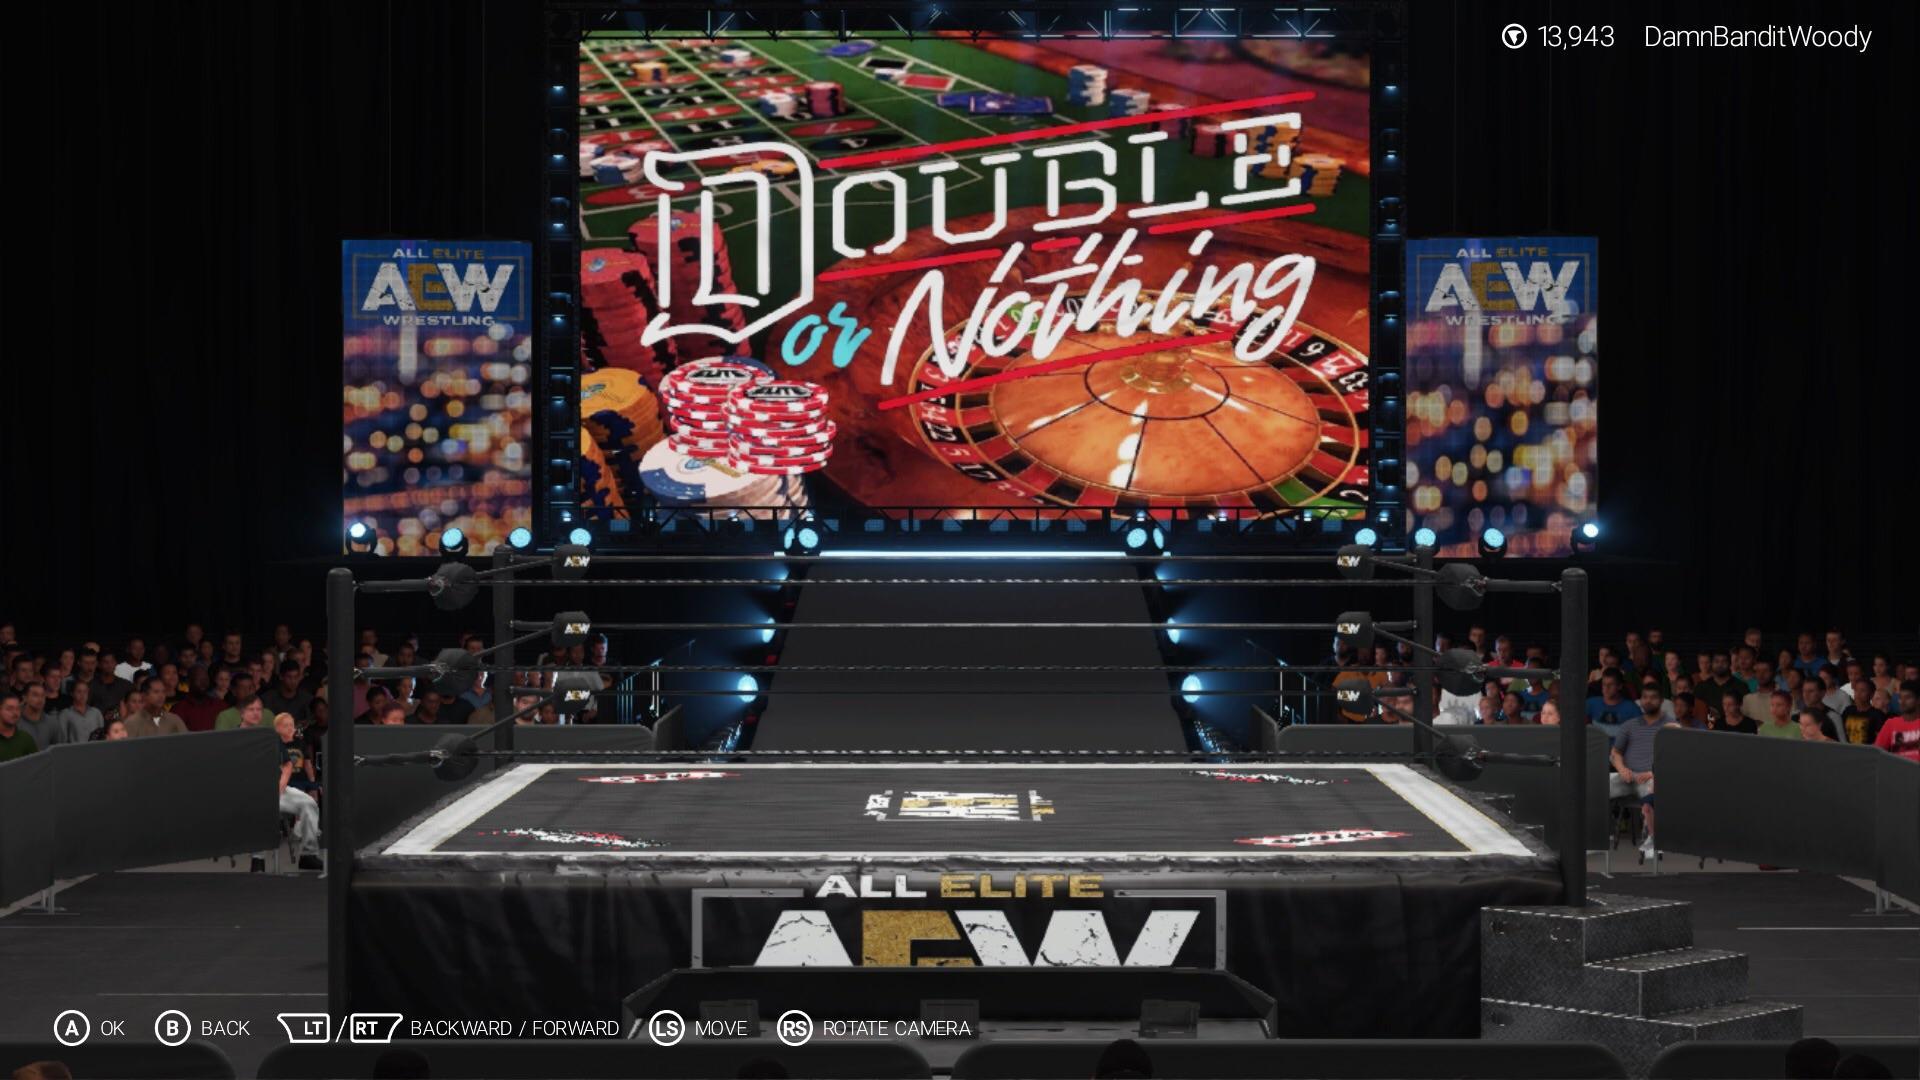 ALL ELITE WRESTLING DOUBLE OR NOTHING!!!! Couldn't wait to jump